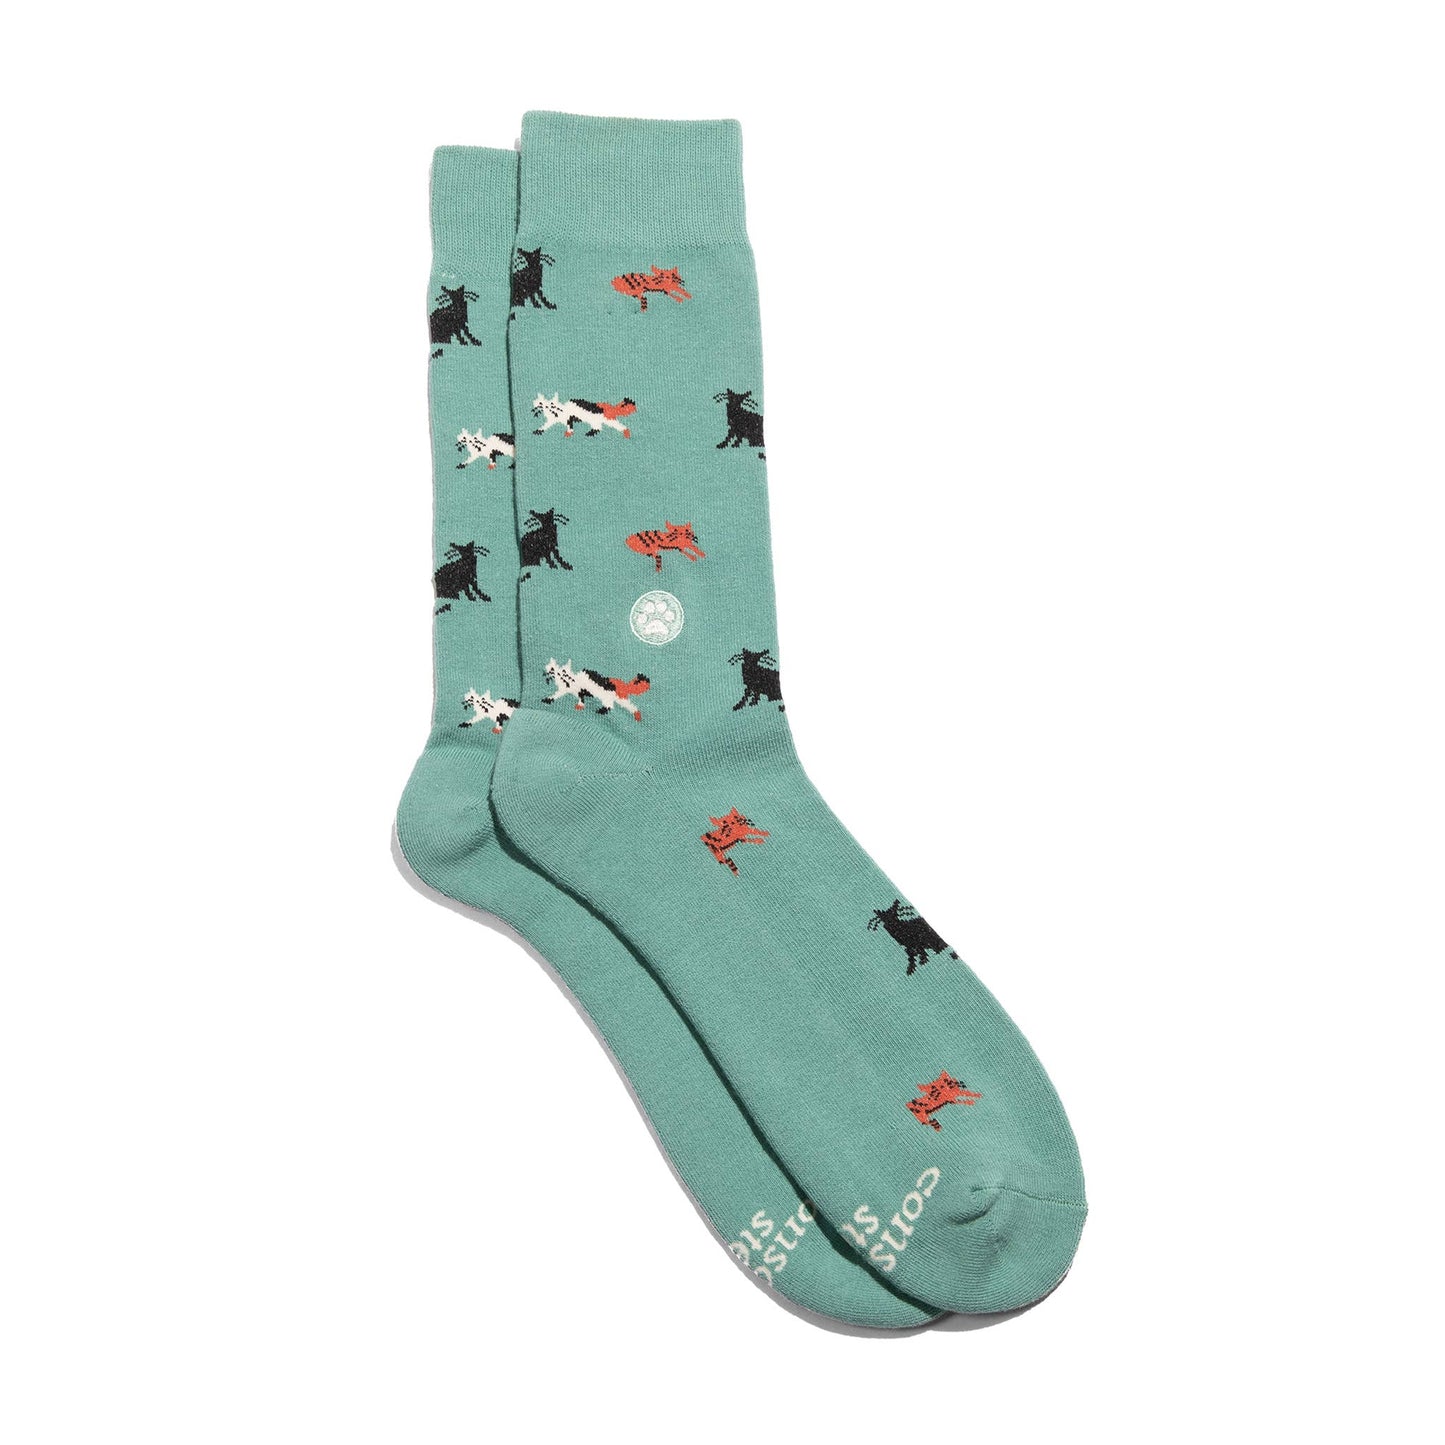 Conscious Step - Socks that Save Cats (Teal Cats)